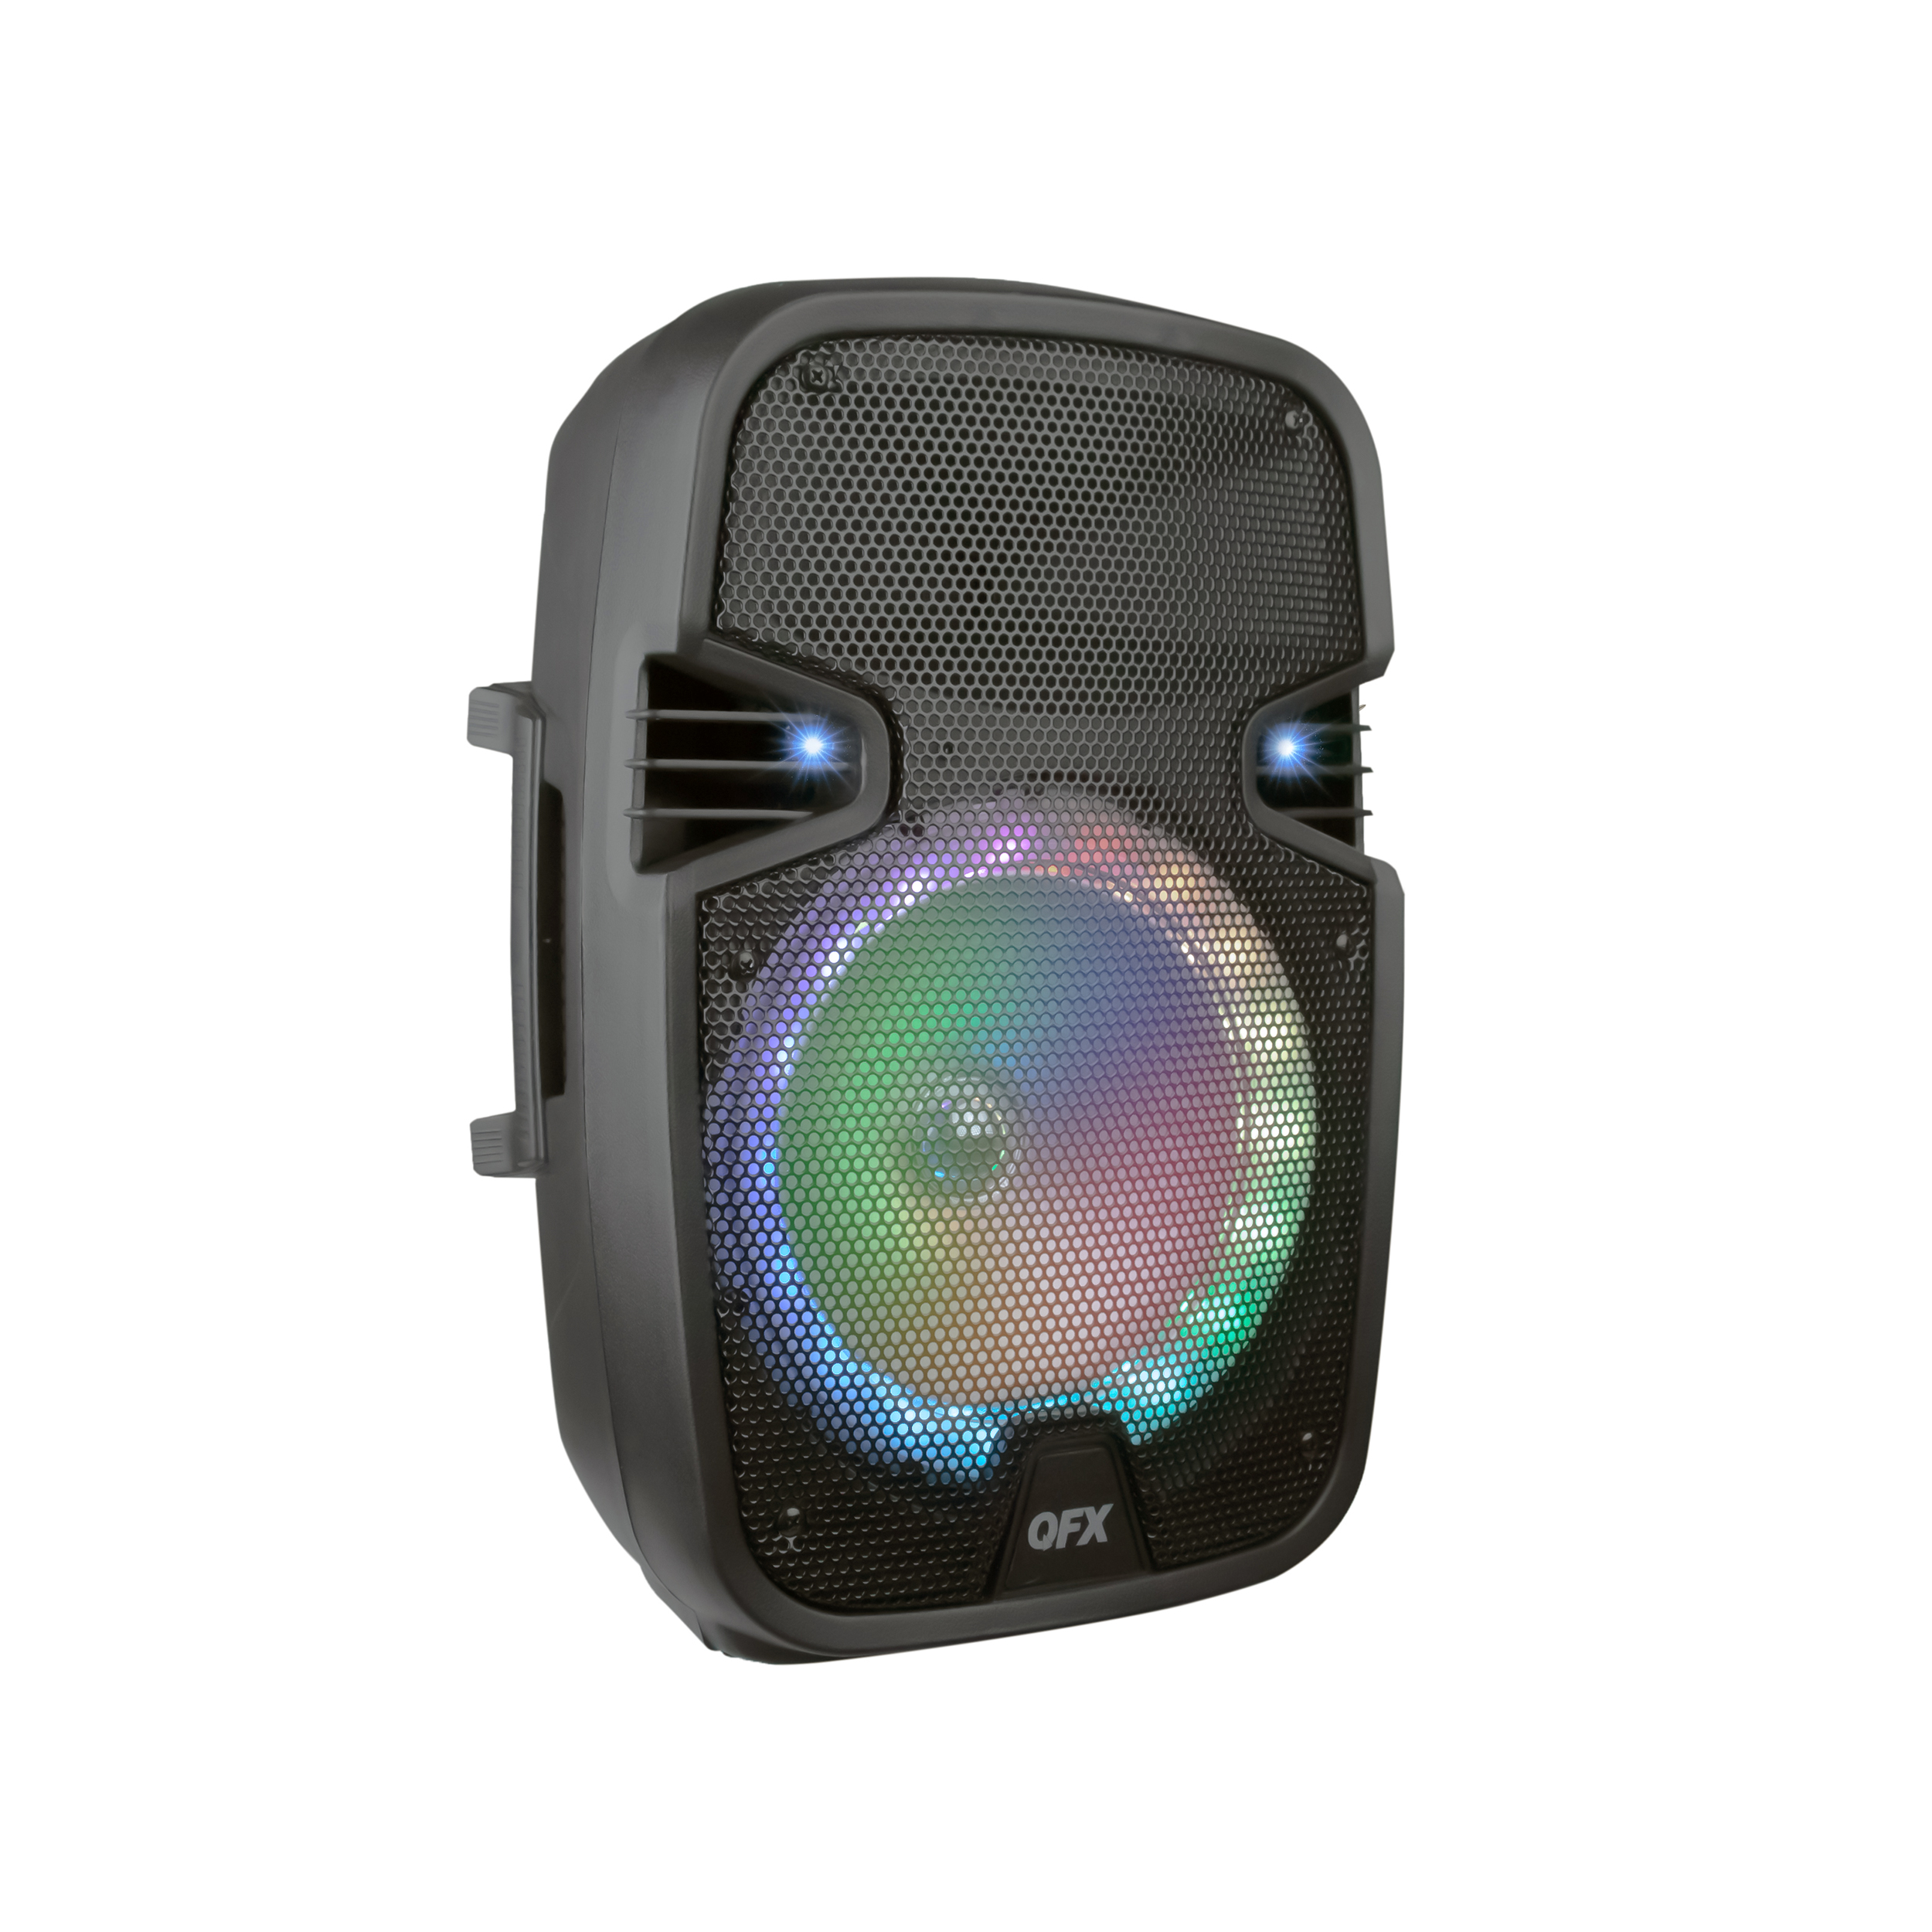 QFX PBX-8074 8-inch, Portable Party Bluetooth Loudspeaker with Microphone & Remote, Black - image 4 of 8